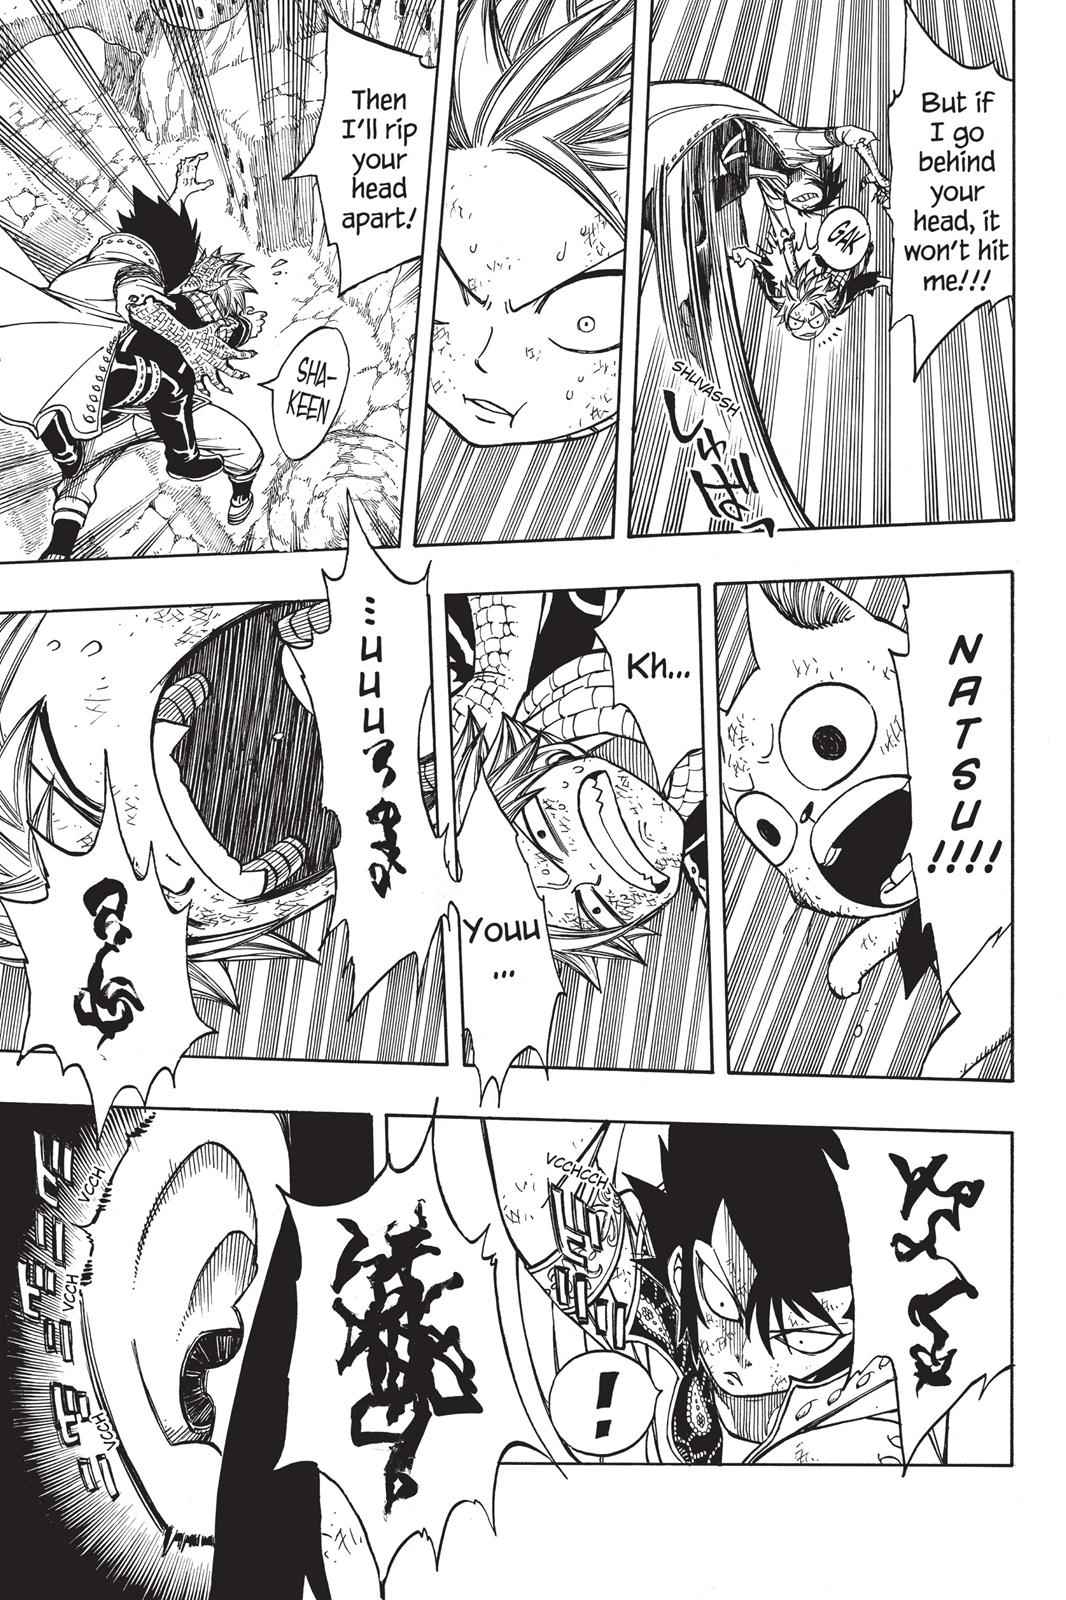  Chapter 150 image 013